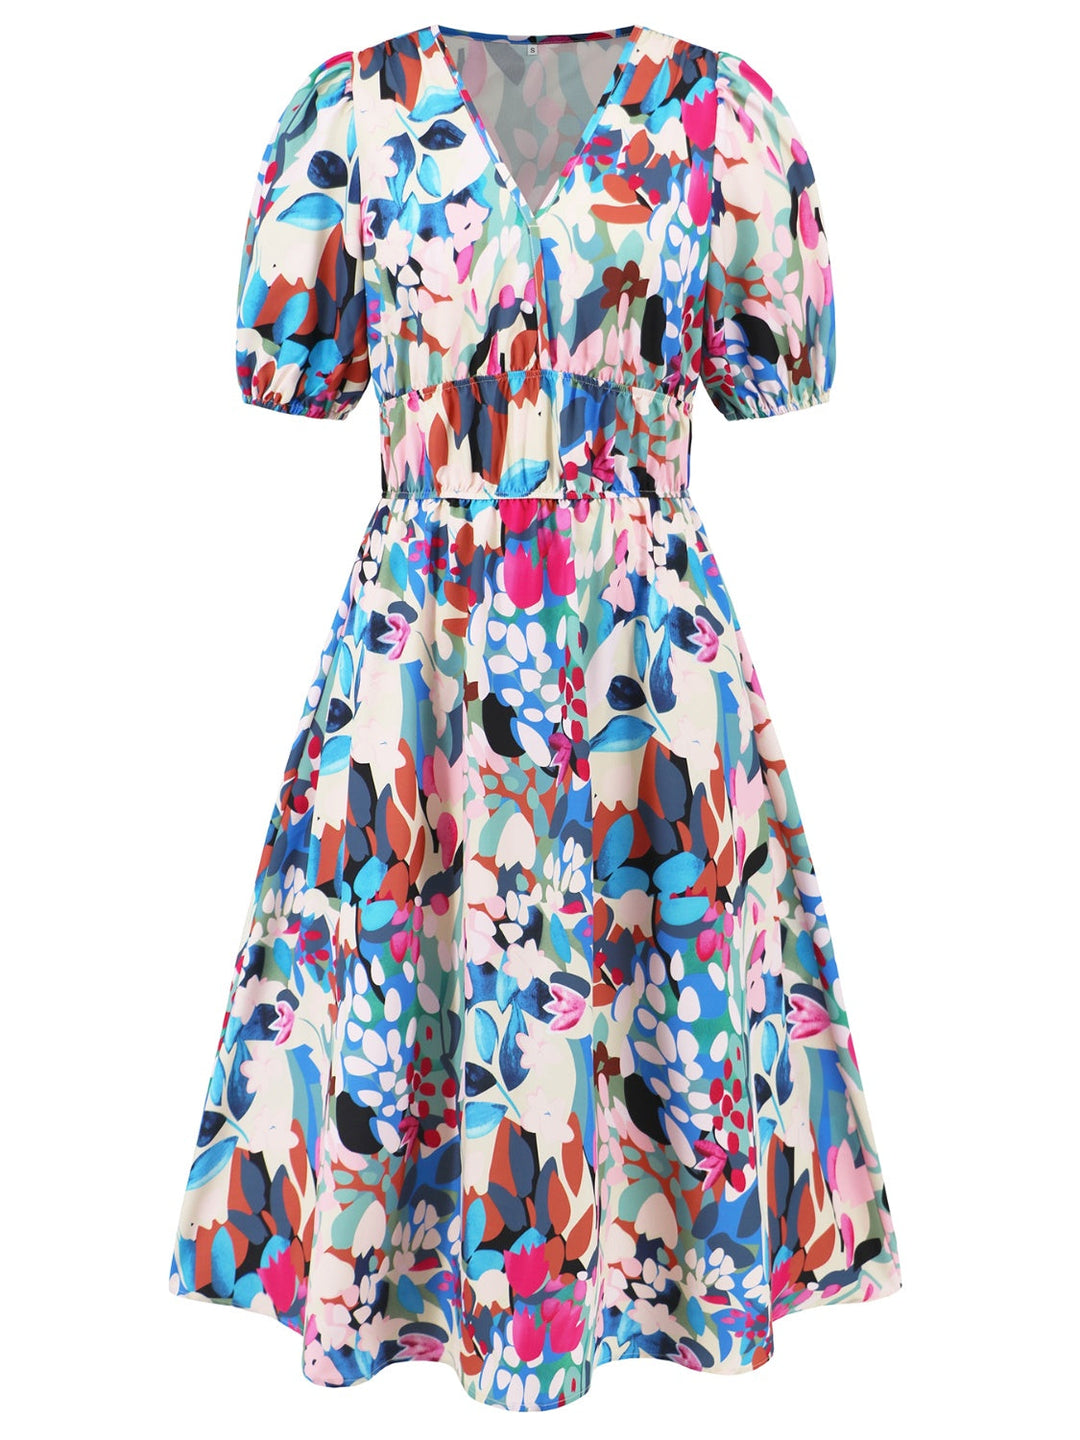 Ruched Printed Surplice Short Sleeve Dress by Coco Charli